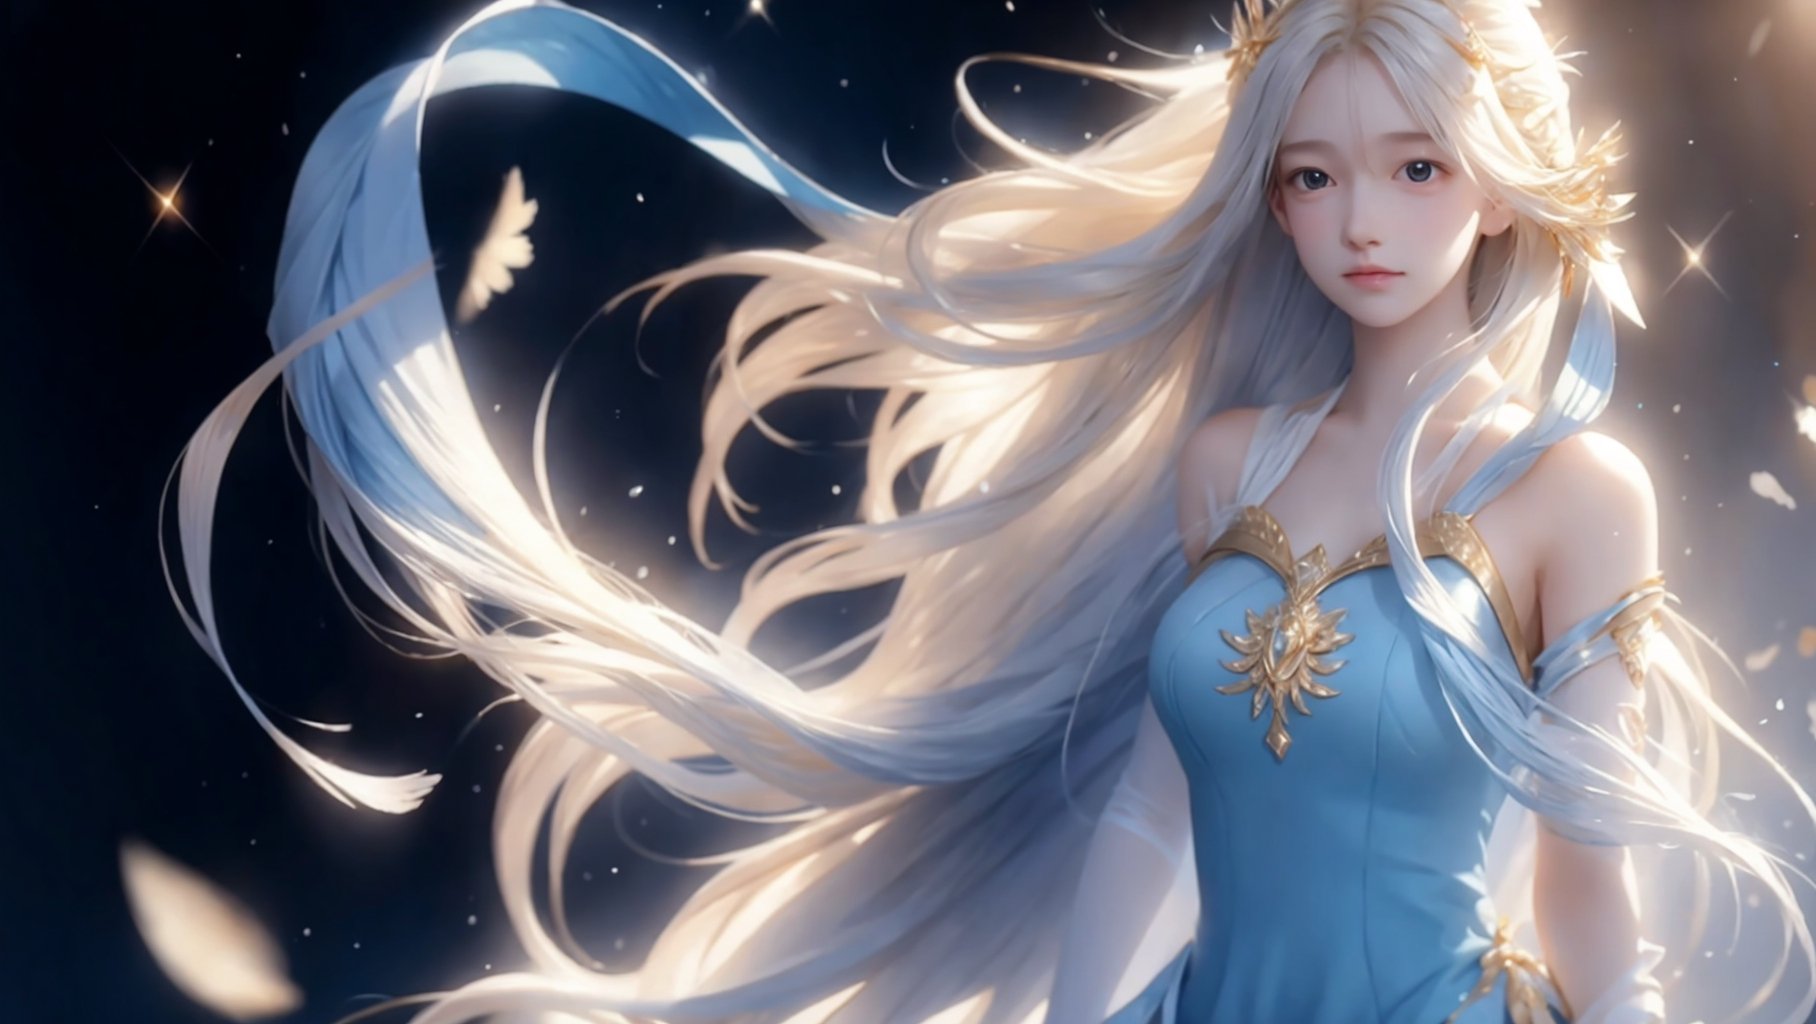 A medium shot, a young girl, 1girl, beautiful long flowing golden hair , wearing a flowing blue and white dress made of waves, representing beauty and elegance. 8K photograph, at sunset, against a radiant and rainbow-like holographic background, a dynamic pose. Final fantasy styles, center image, a highlight in the middle of a journey.,1 girl,